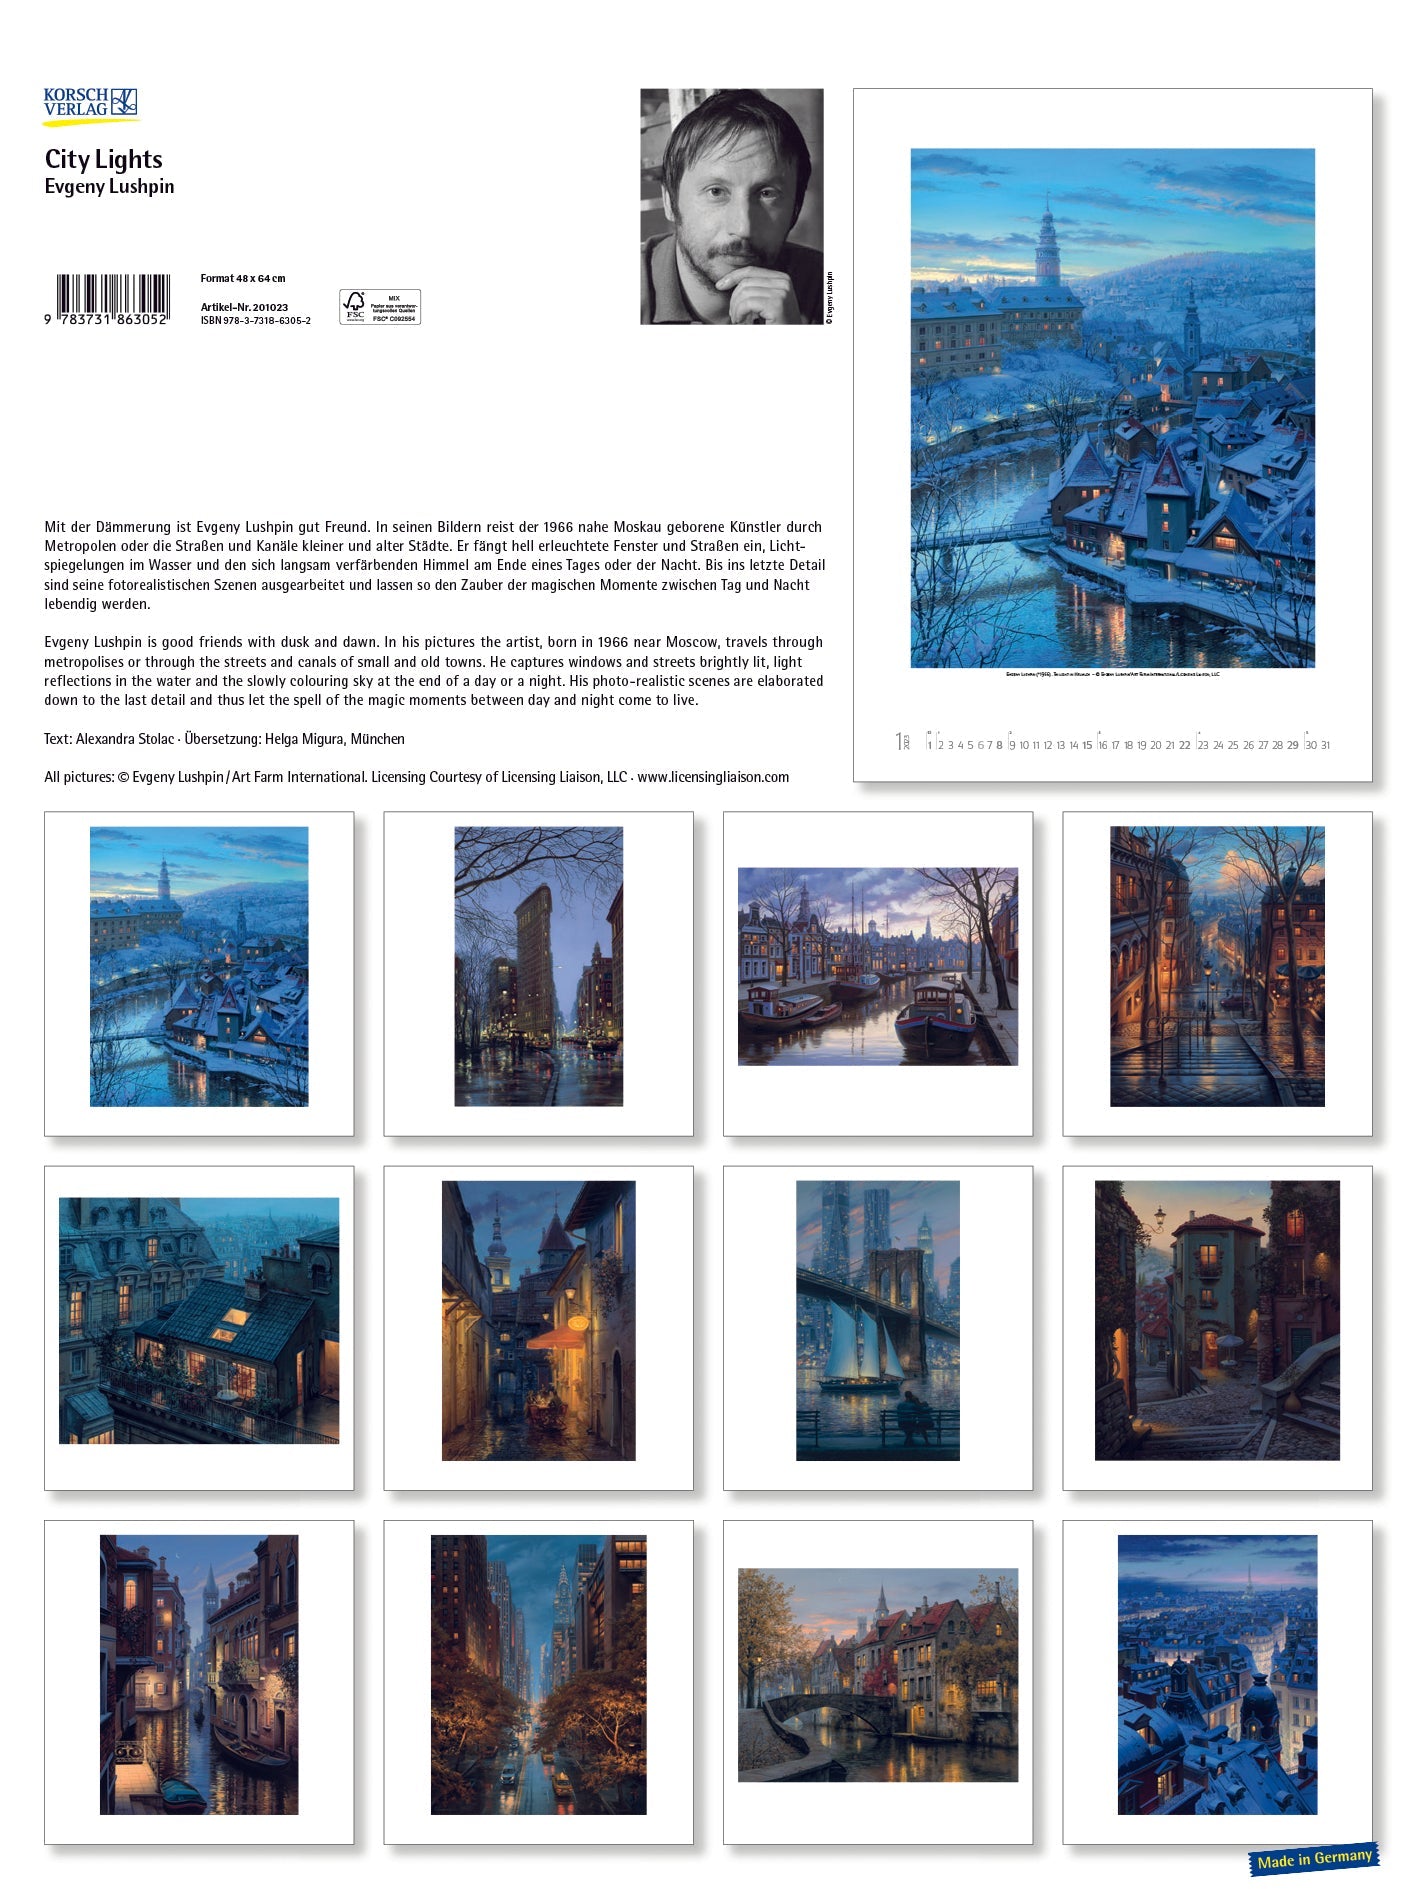 2023 Citylights-Evgeny Lushpin (Large) - Deluxe Wall Poster Calendar